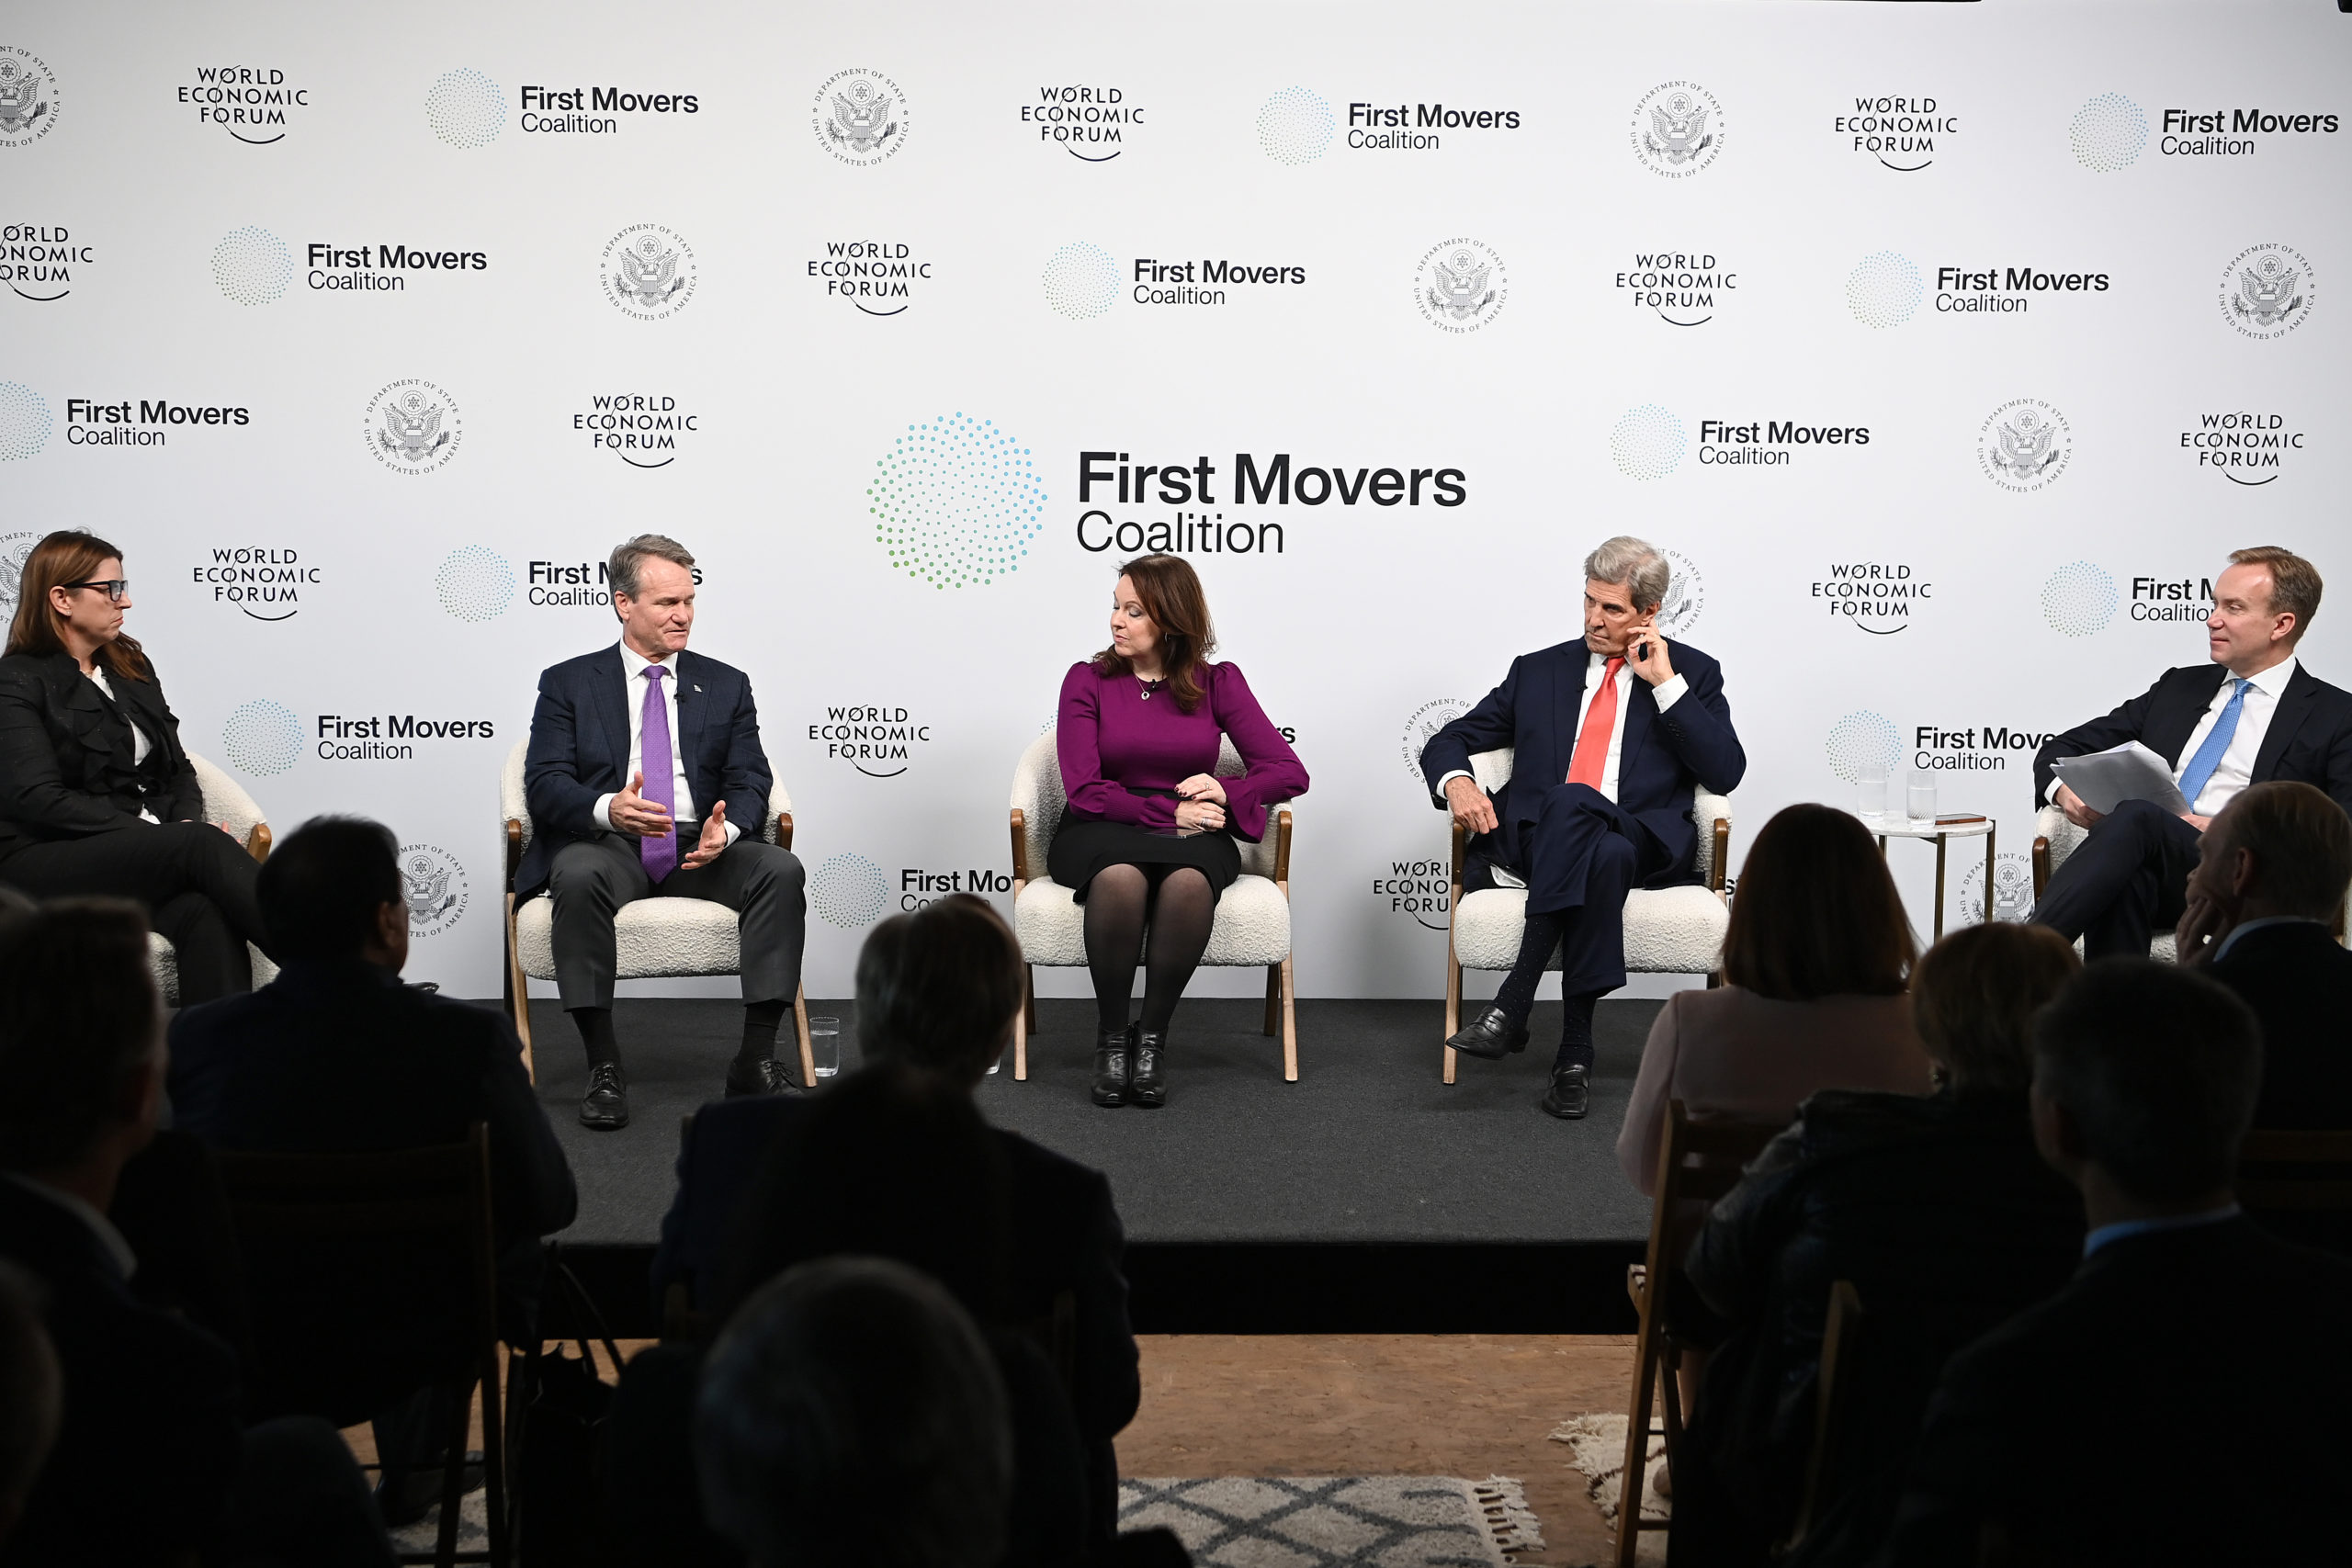 Bank of America CEO Brian Moynahan speaks alongside Special Presidential Envoy on Climate John Kerry and other leaders at the United Nations climate conference on Nov. 4, 2021 in Glasgow, Scotland. (Jeff J. Mitchell/Getty Images)